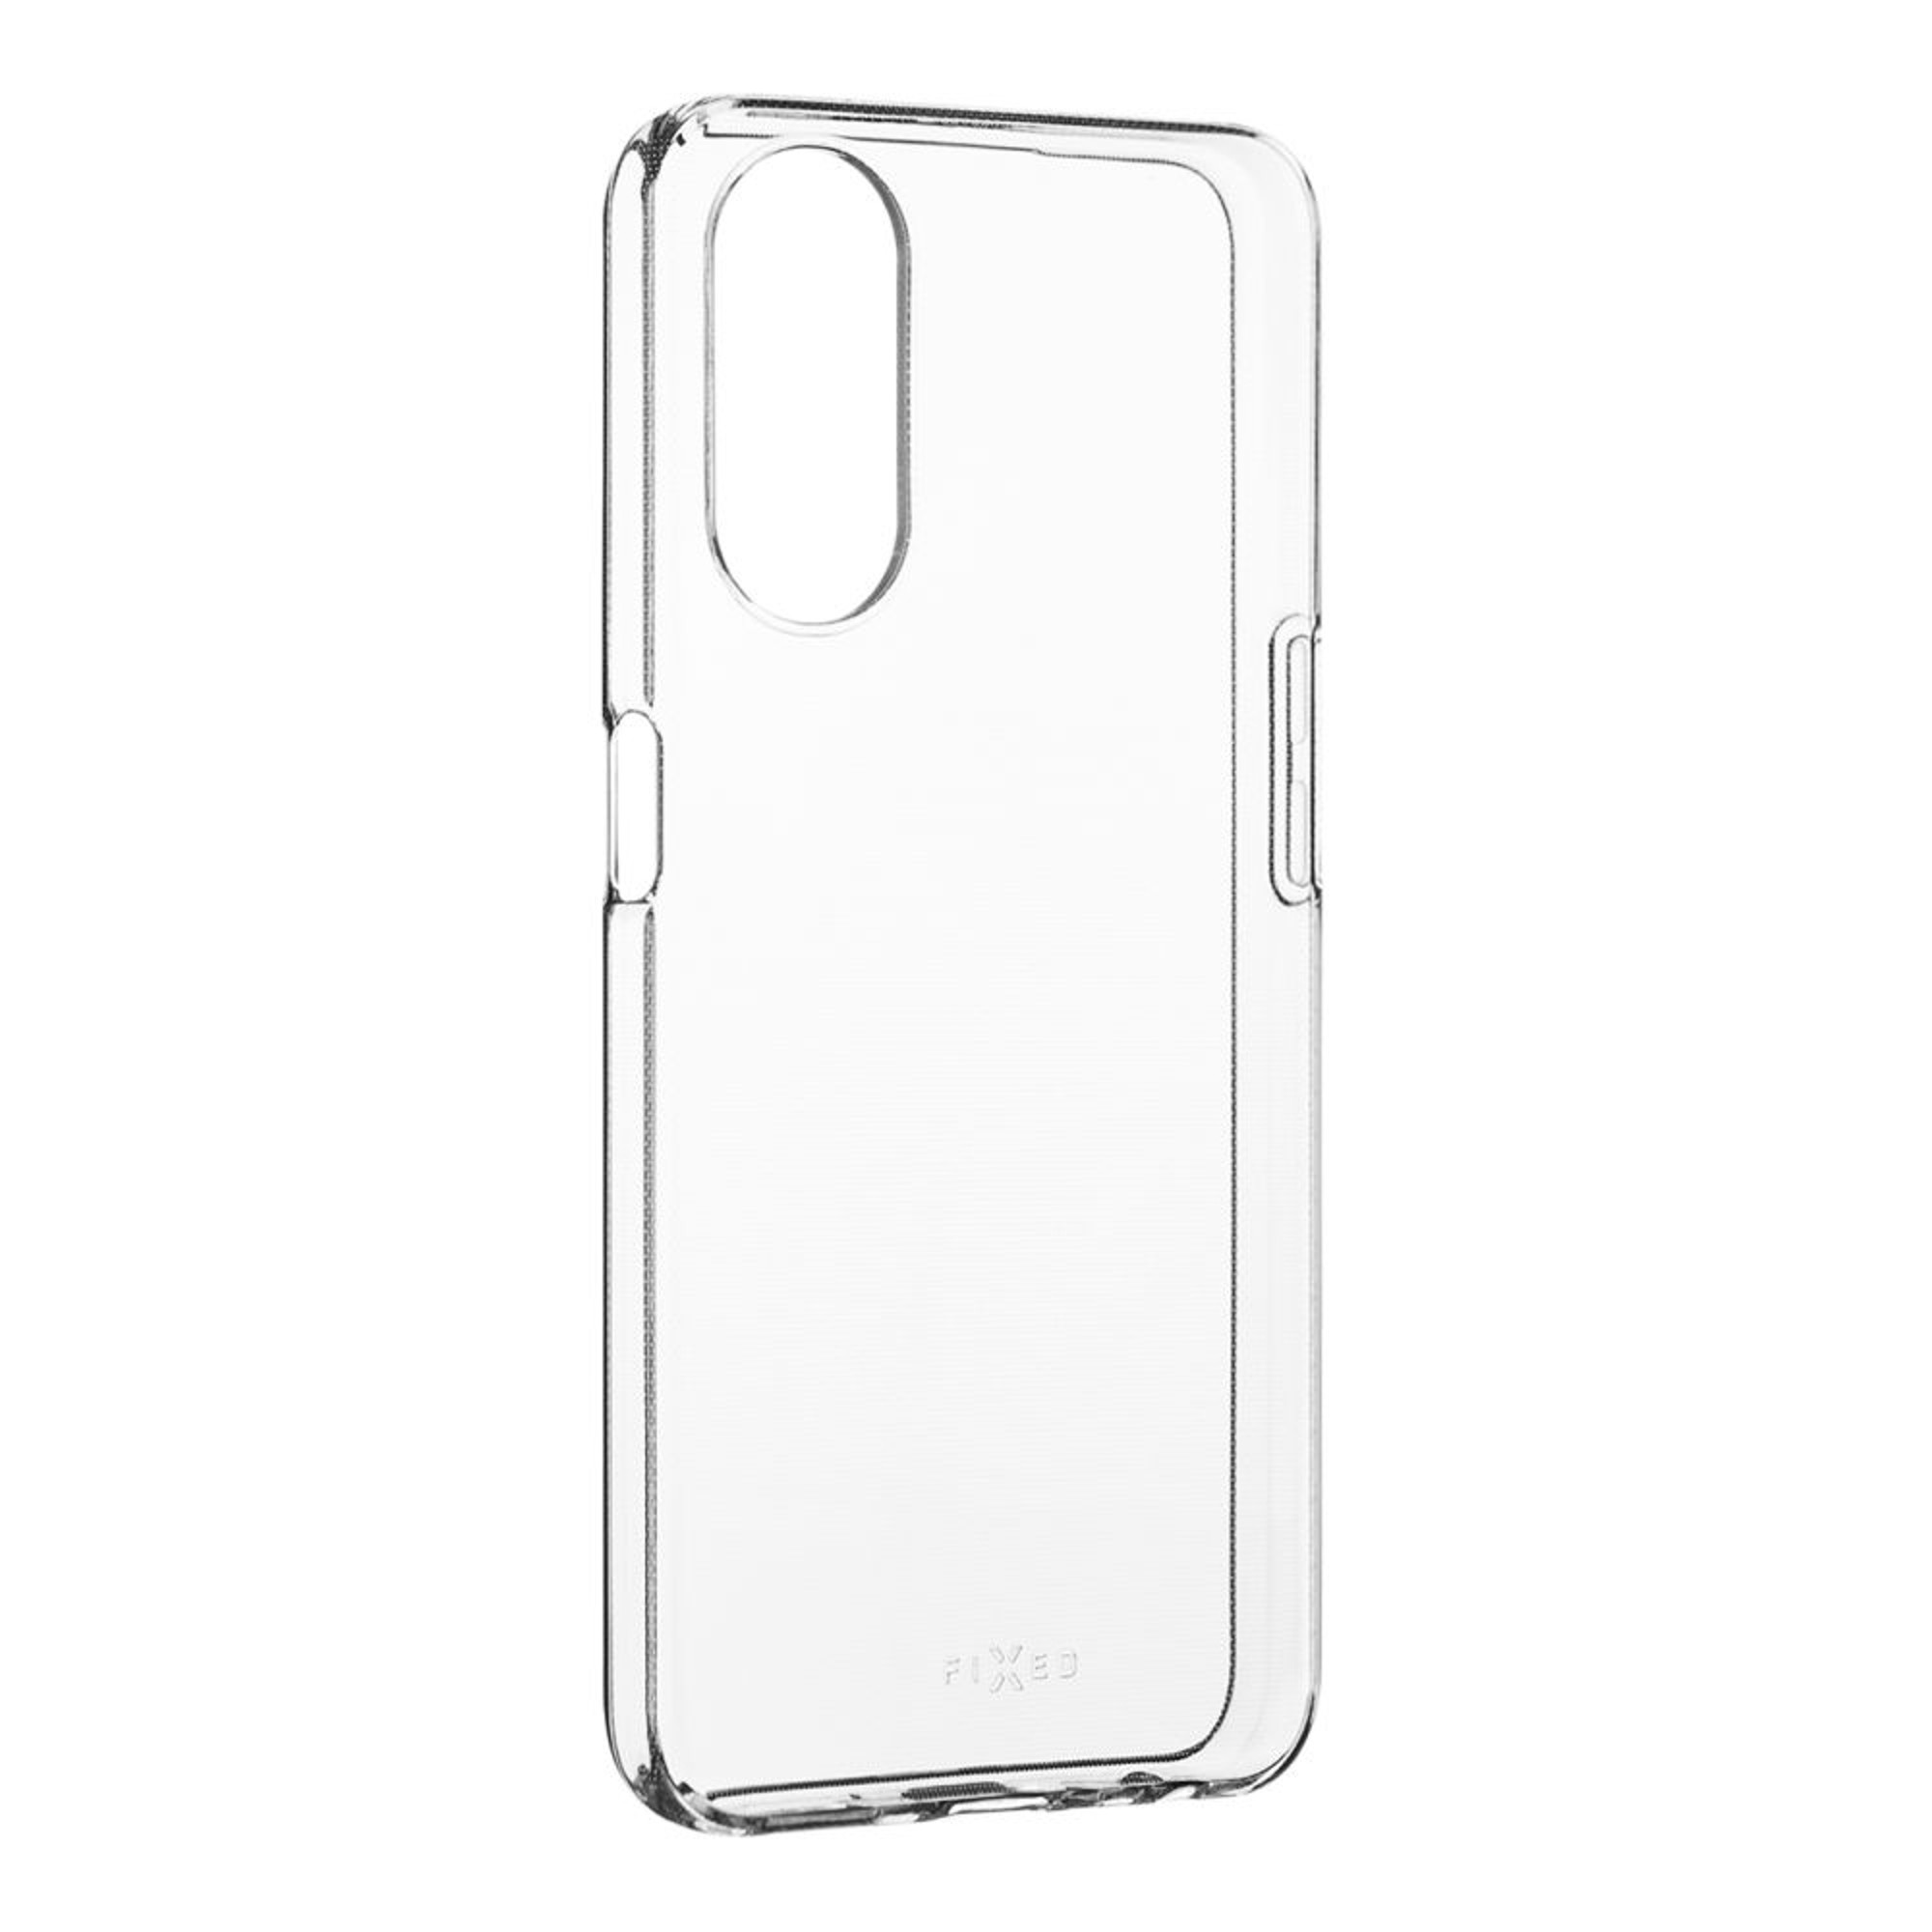 5G, FIXED FIXTCC-1144, Oppo, Transparent A78 Backcover,